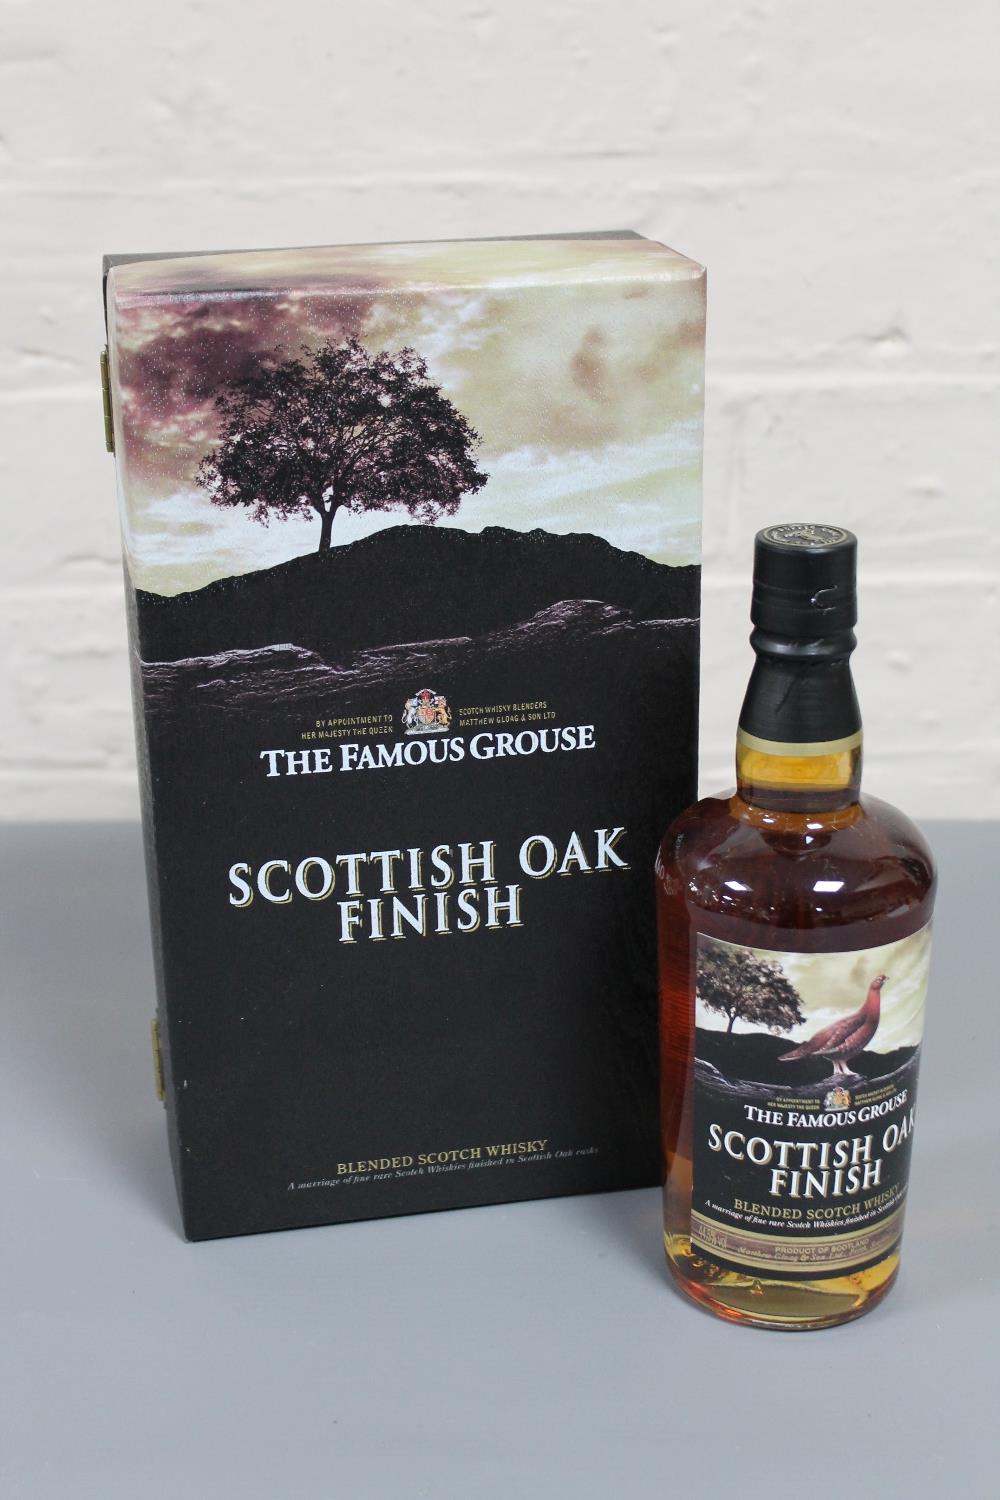 The Famous Grouse, Scottish Oak Finish, 500ml, in presentation box with scrolls.